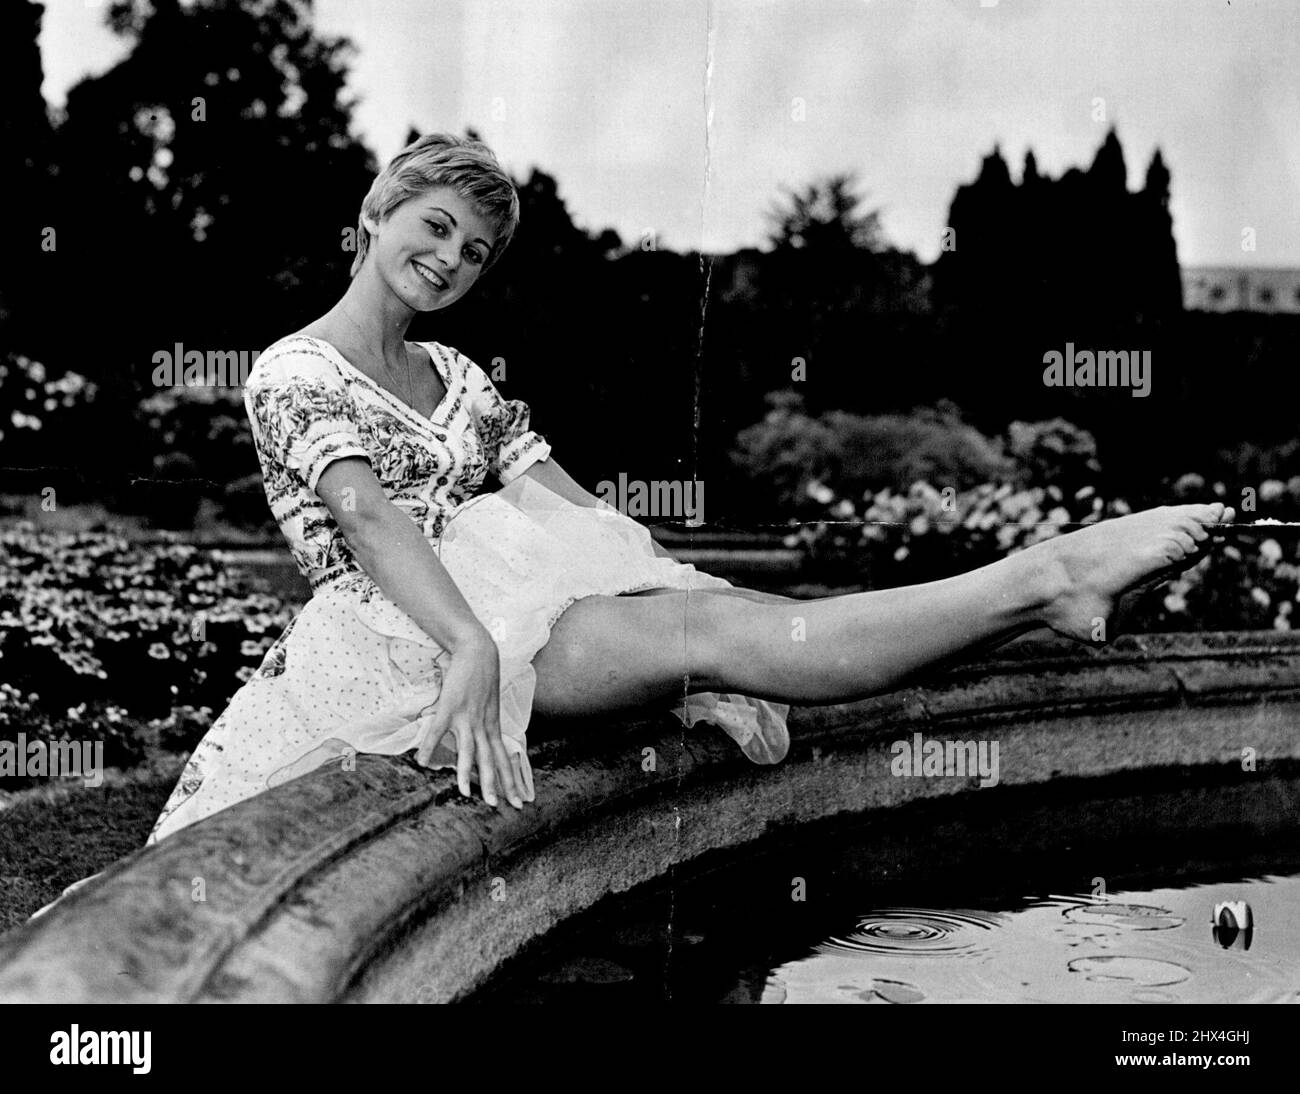 No Danger of this Jill falling down the Hill. She's 22-year-old Jill Ireland, cooling her toes by the lily pond at Pinewood Studios (England). Jill has just signed a contact to make a film, Simon and Laura. August 10, 1955. Stock Photo